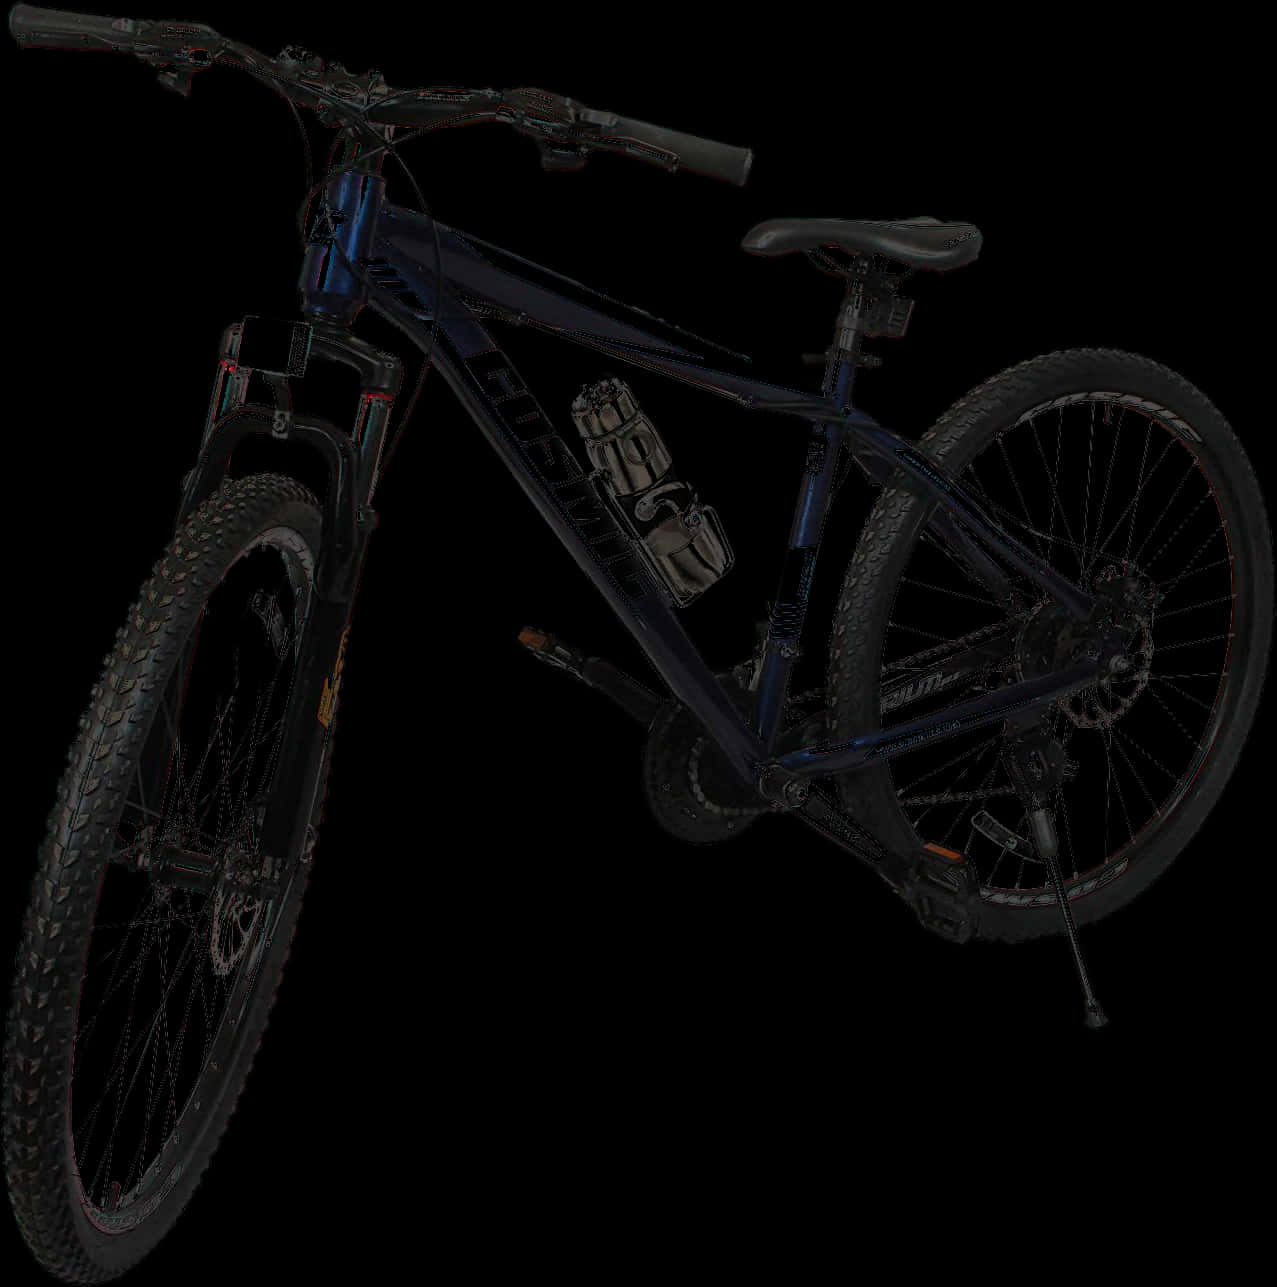 A Black Bicycle With A Black Background